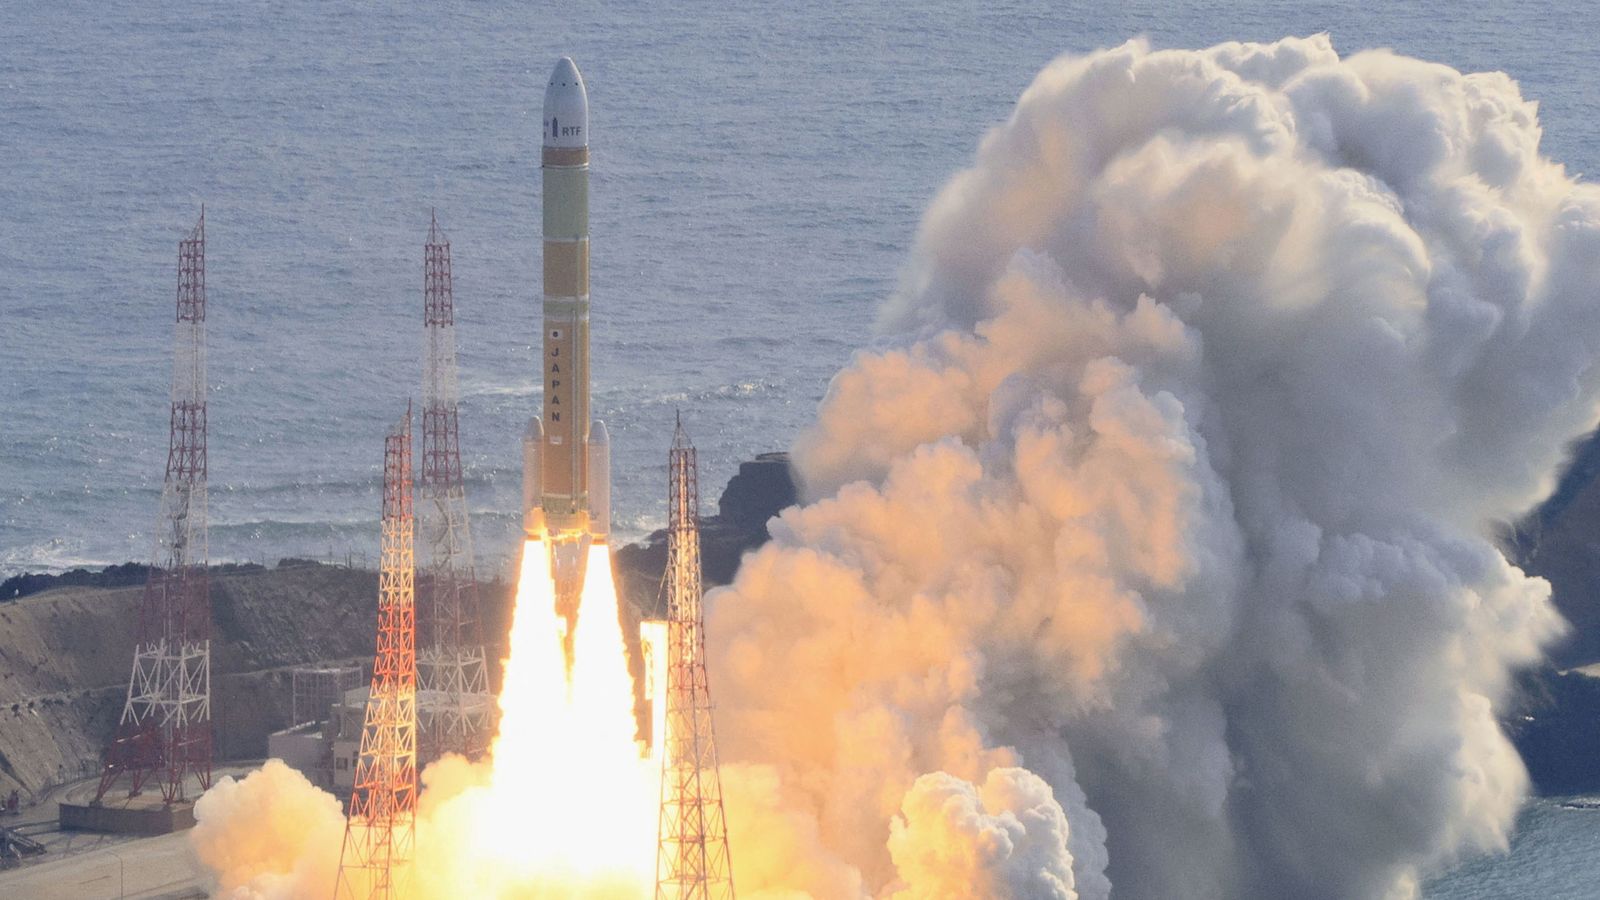 japan's new flagship rocket reaches orbit in key test after failed debut